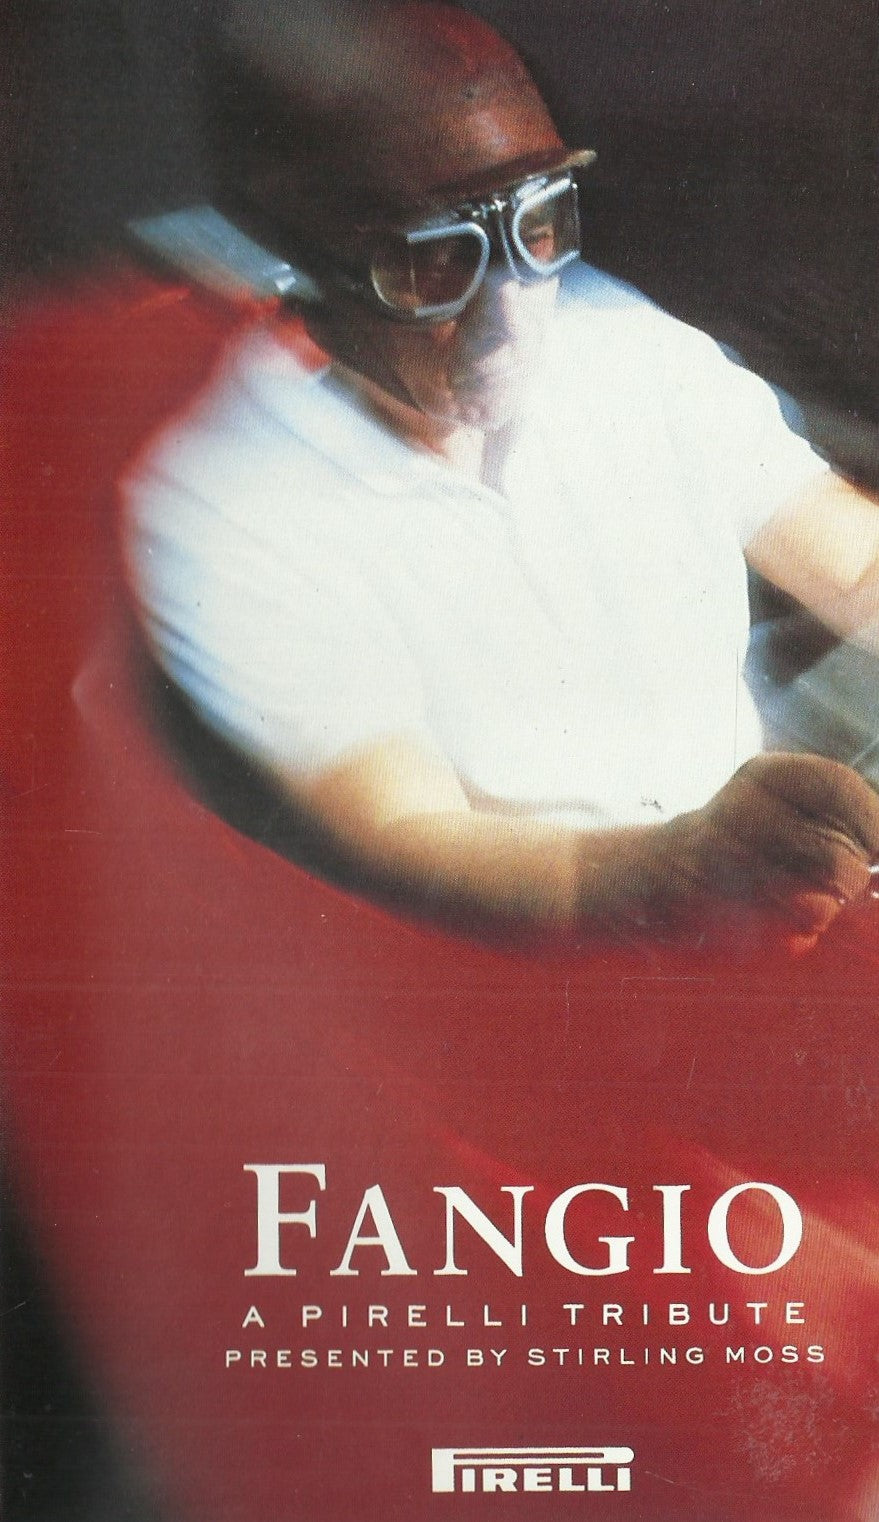 Fangio: A Pirelli Tribute - Presented by Stirling Moss (Duke Videos) [VHS]